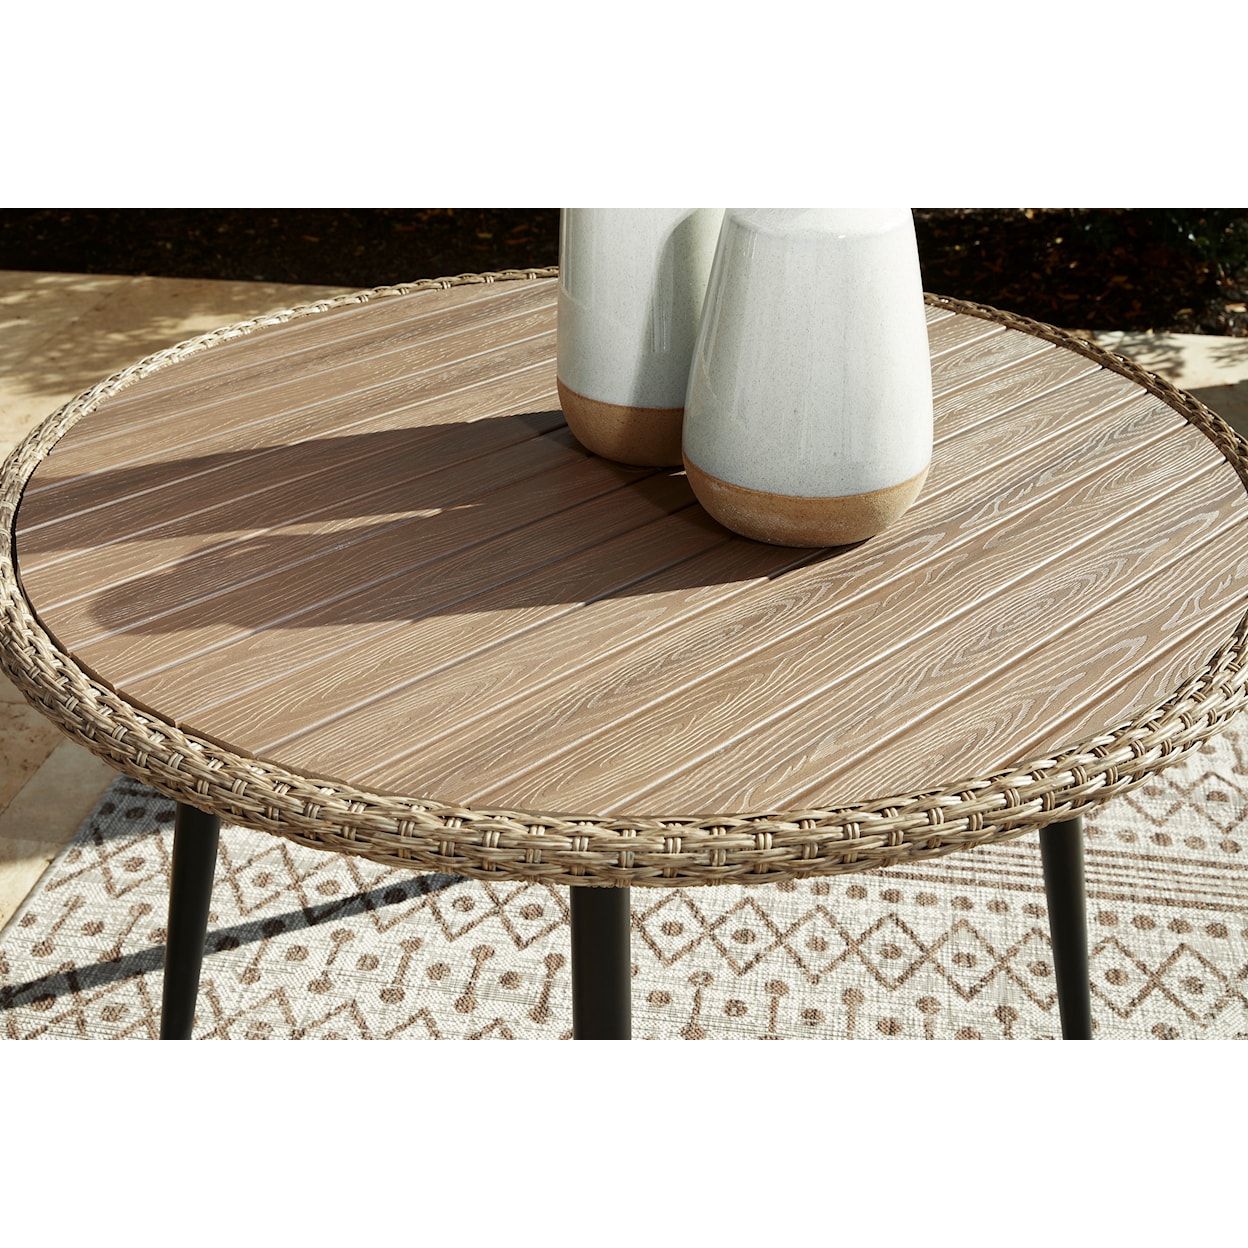 Signature Design by Ashley Amaris Outdoor Dining Table